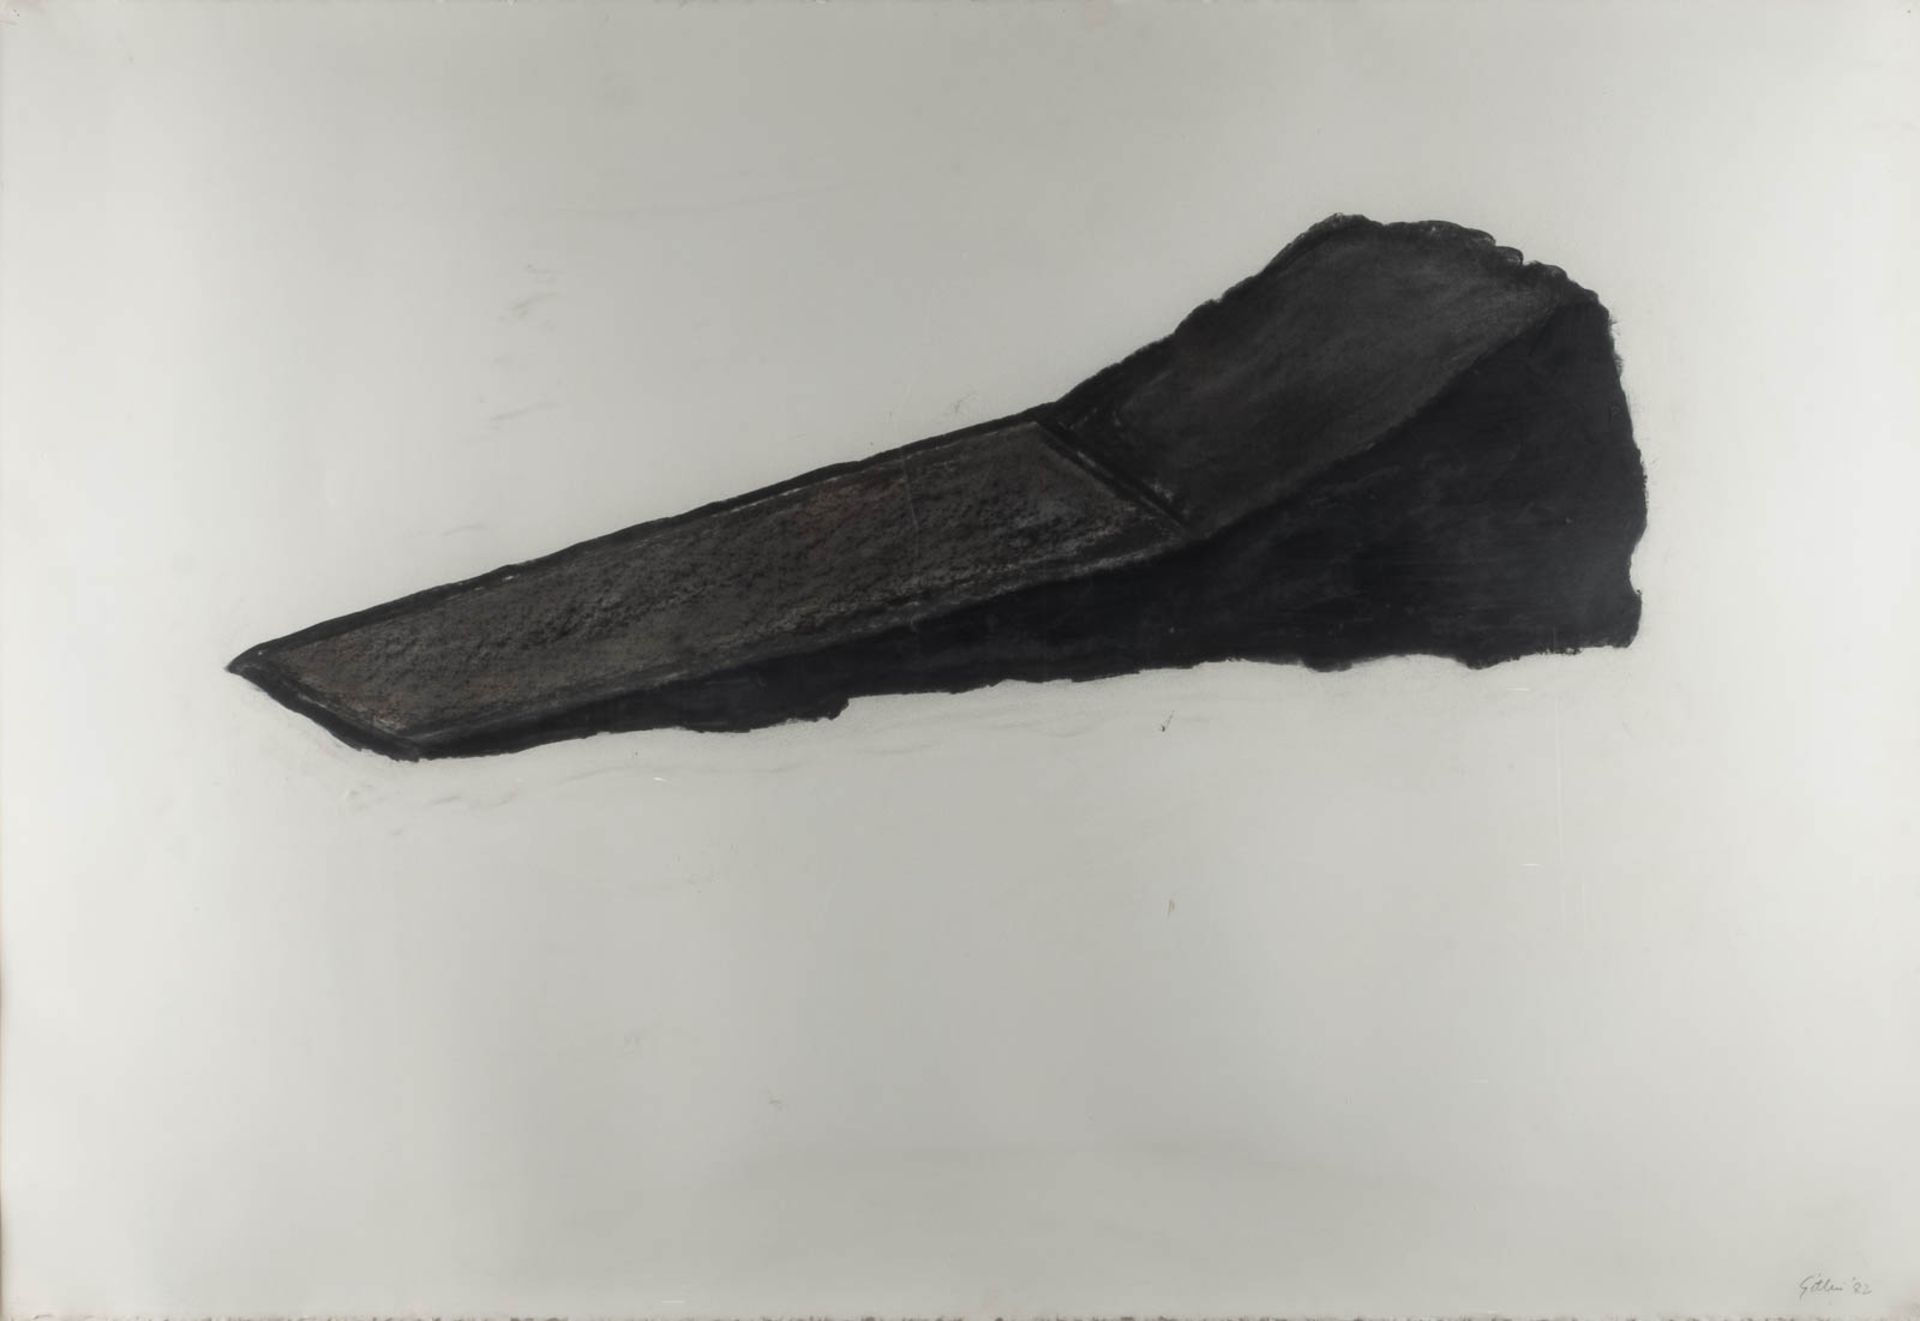 MICHAEL GITLIN1943 Capetown RAMP (1982) Charcoal on strong paper. Sheet size 75,5 x 110,5 cm (f.